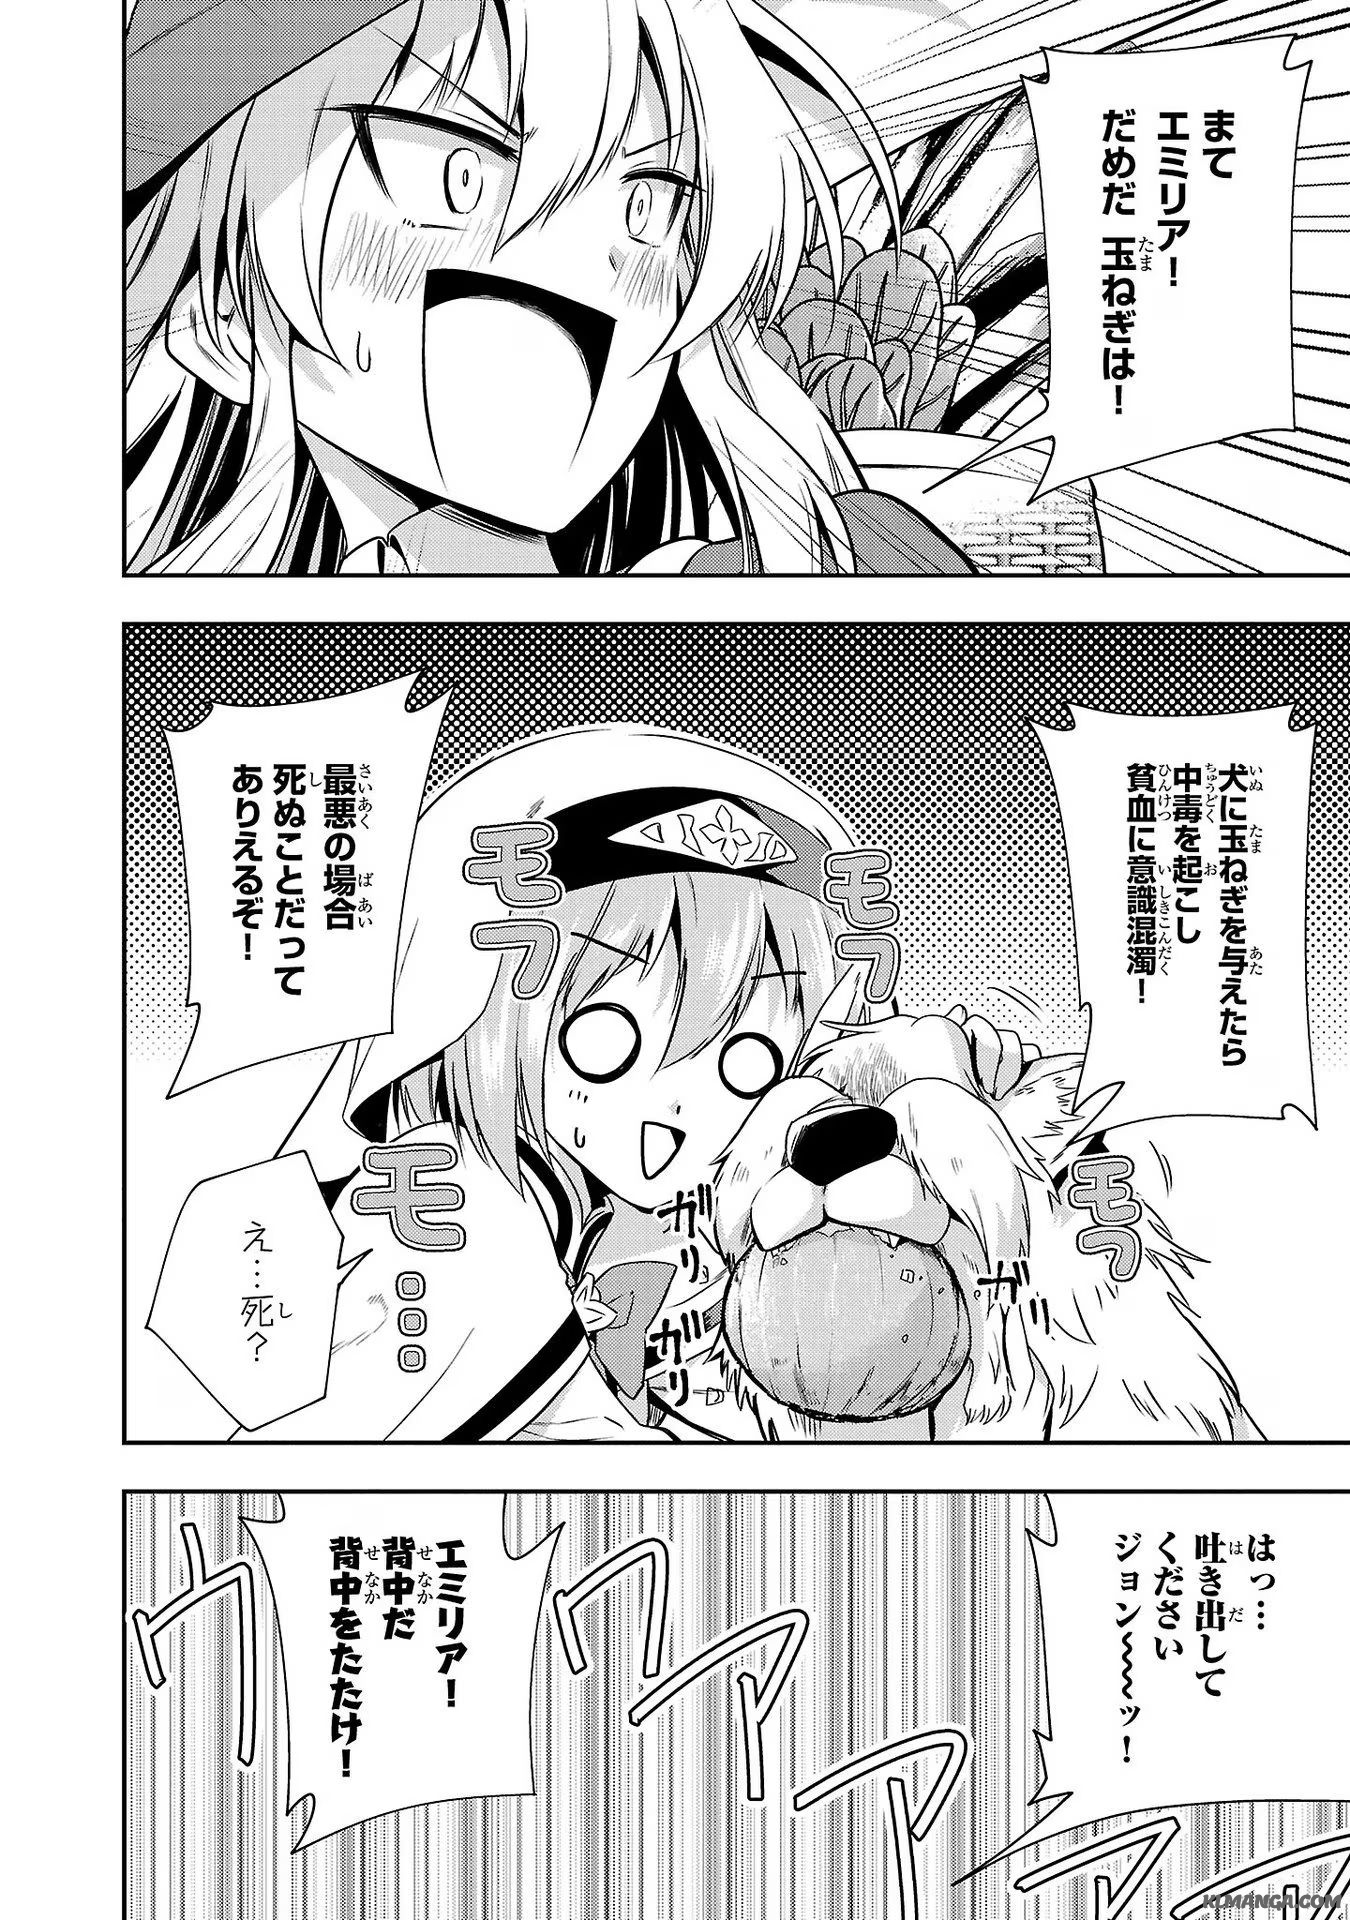 Hungry Saint and Full-Stomach Witch’s Slow Life in Another World! 腹ペコ聖女とまんぷく魔女の異世界スローライフ! 第12話 - Page 12